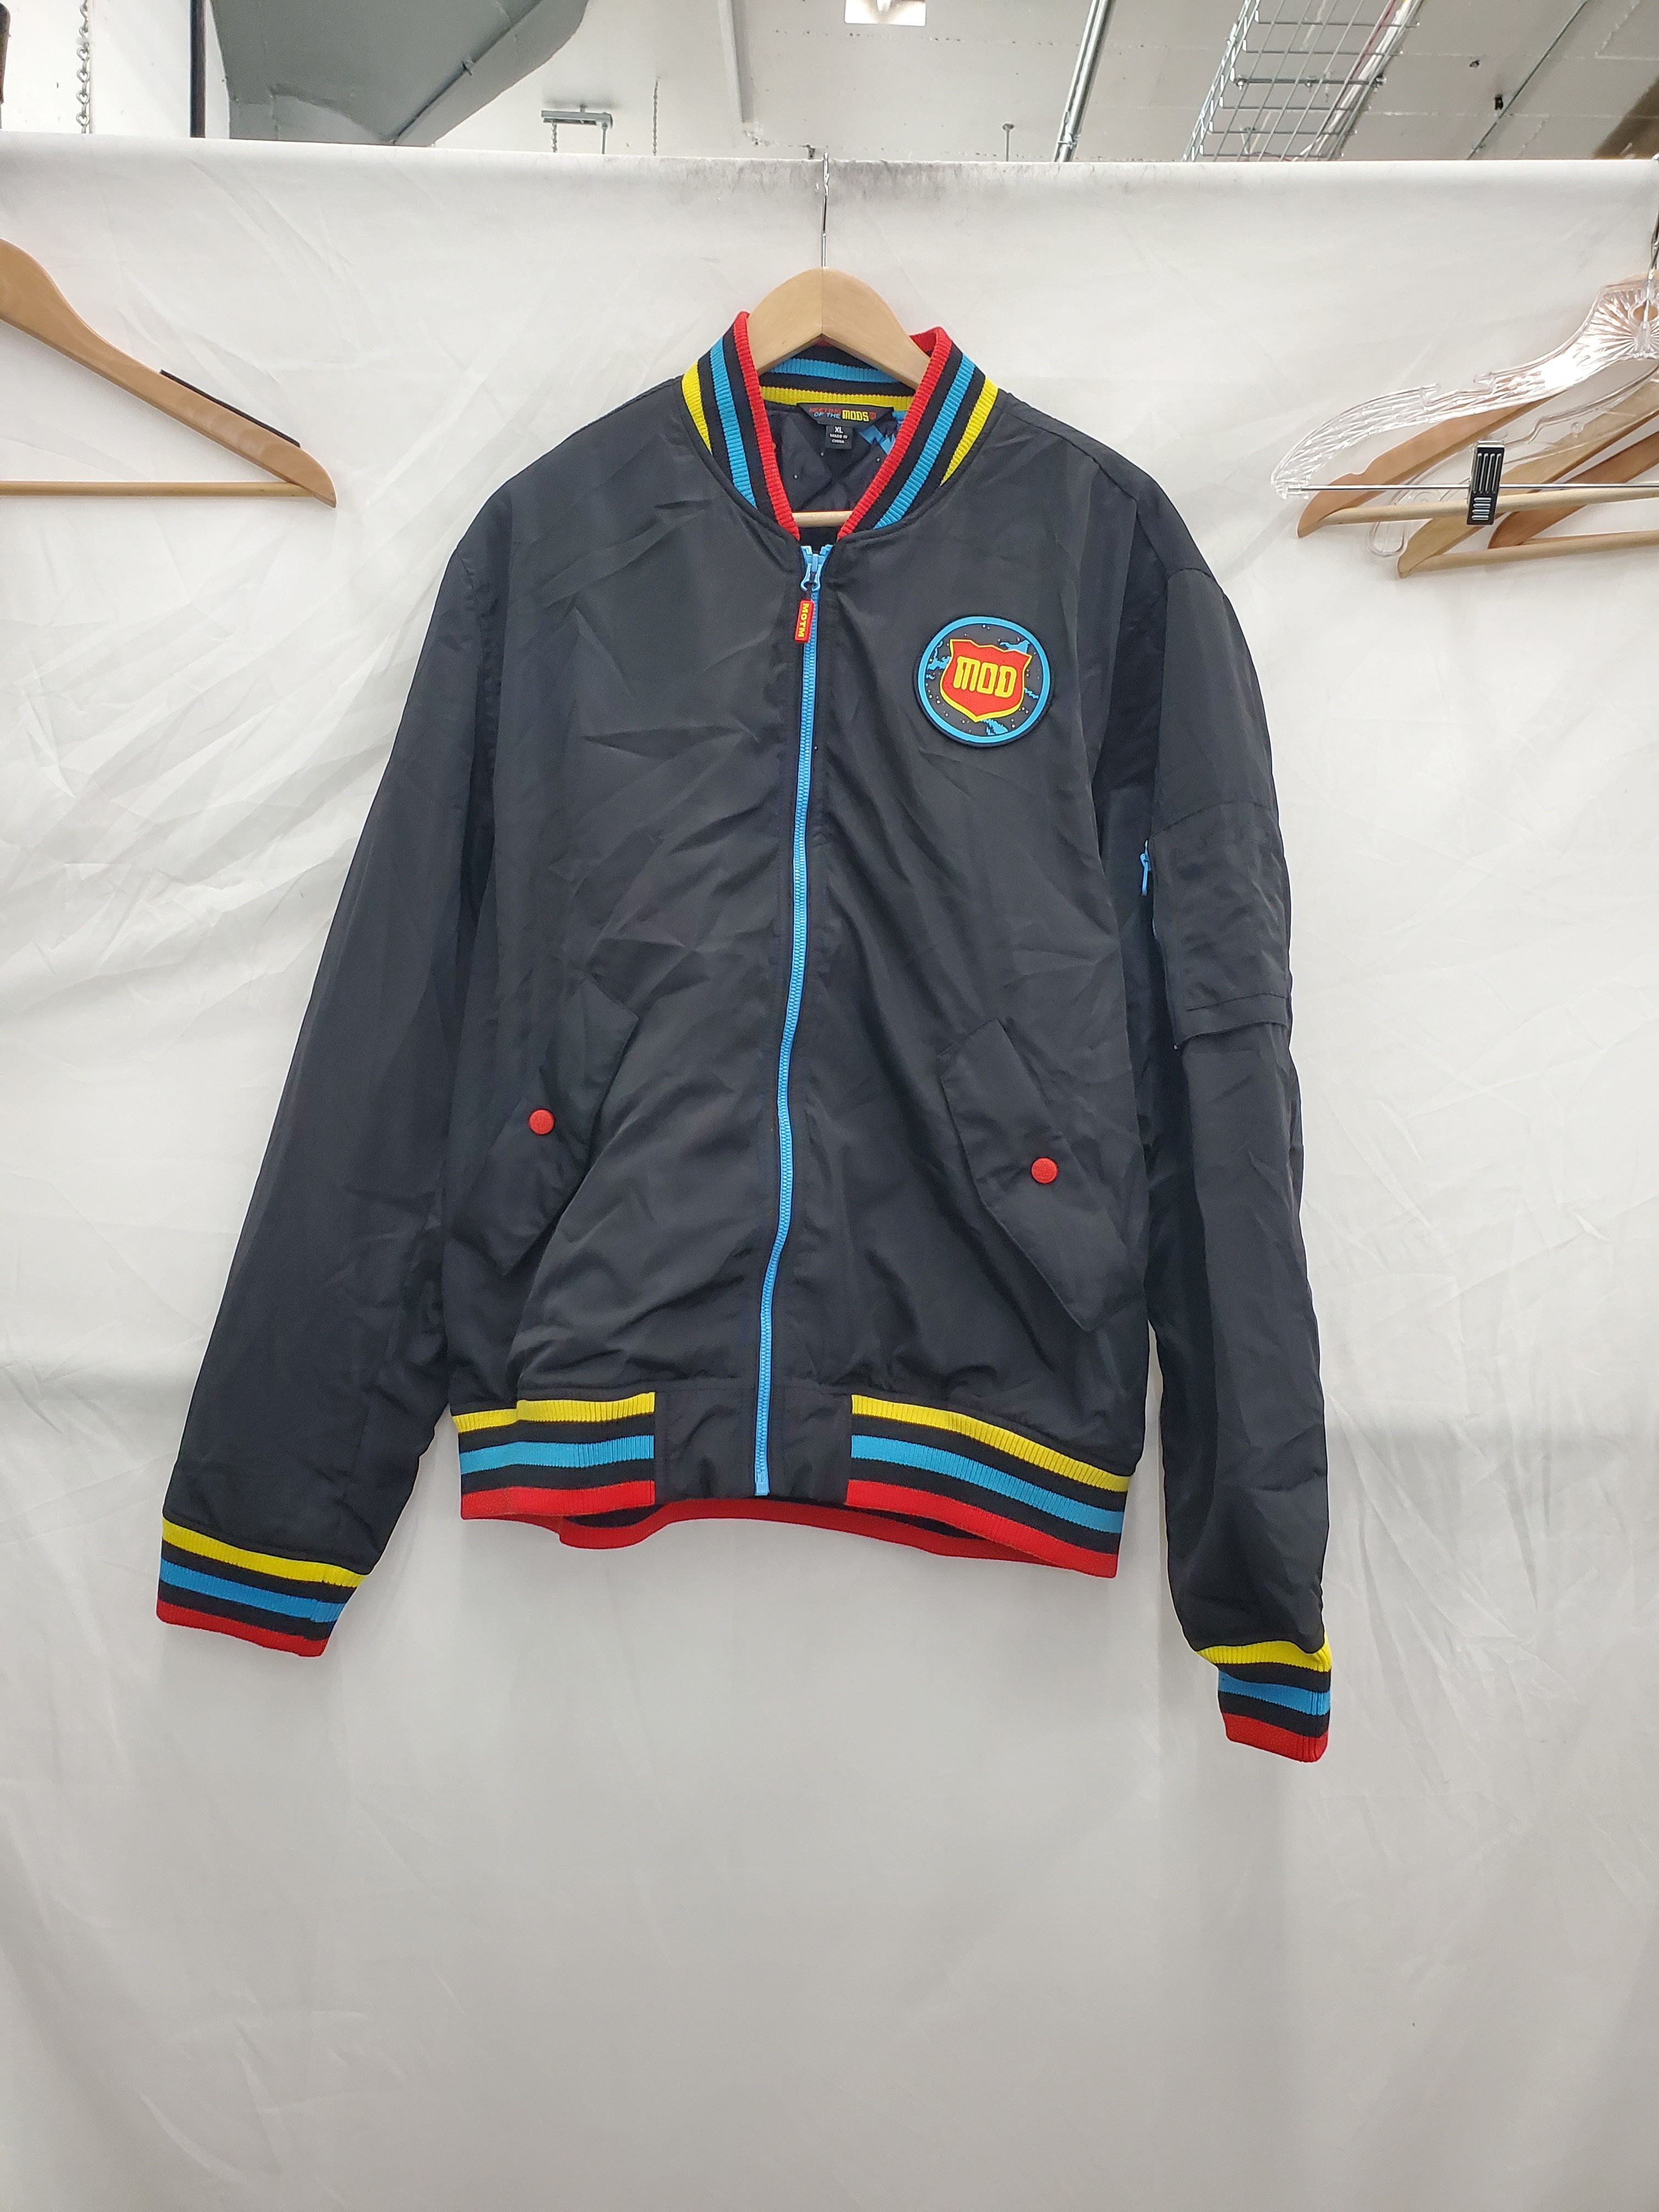 Buy the MOD Pizza 2023 Meeting Of The MODS jacket-used Size-XL